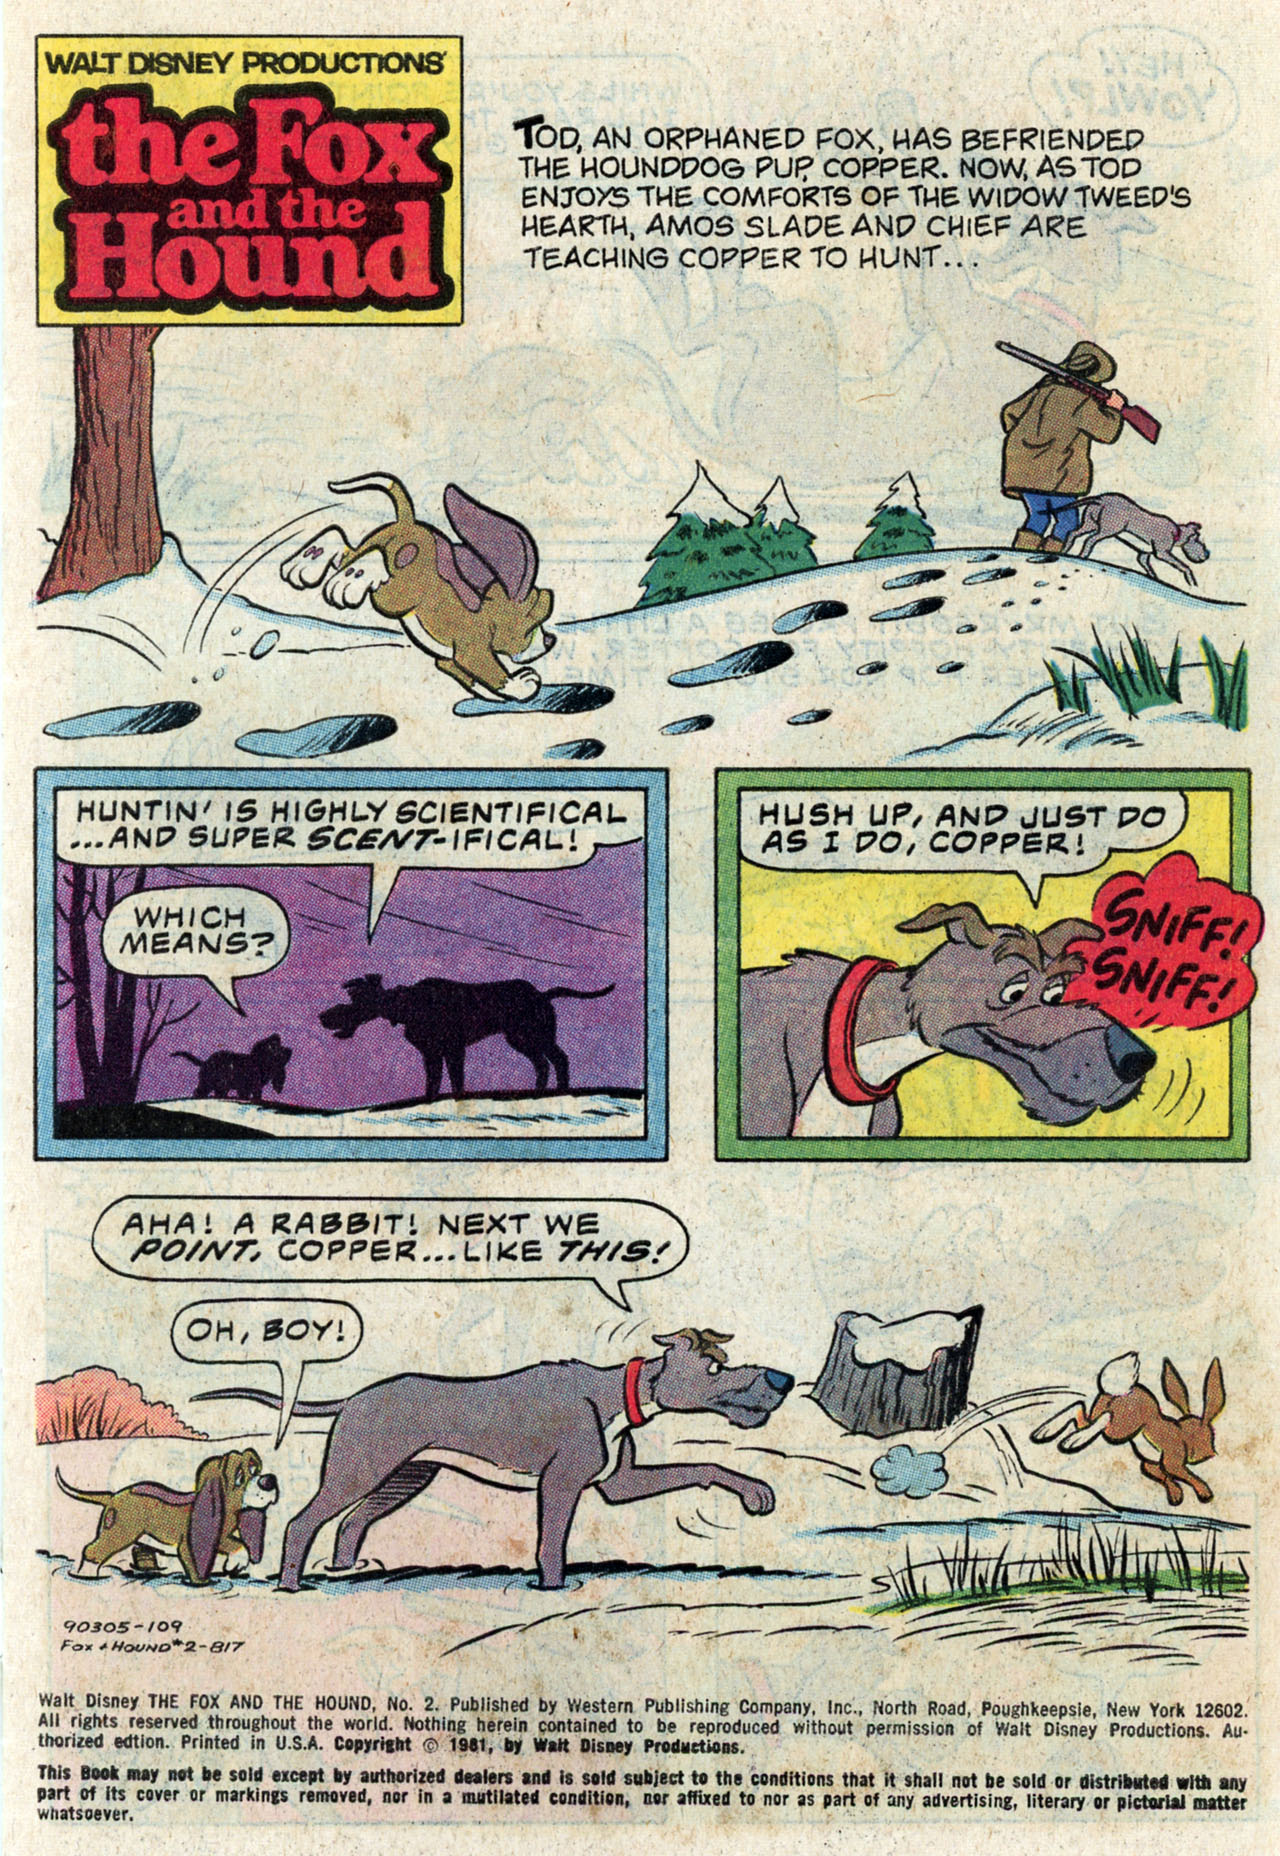 Read online Walt Disney Productions' The Fox and the Hound comic -  Issue #2 - 3